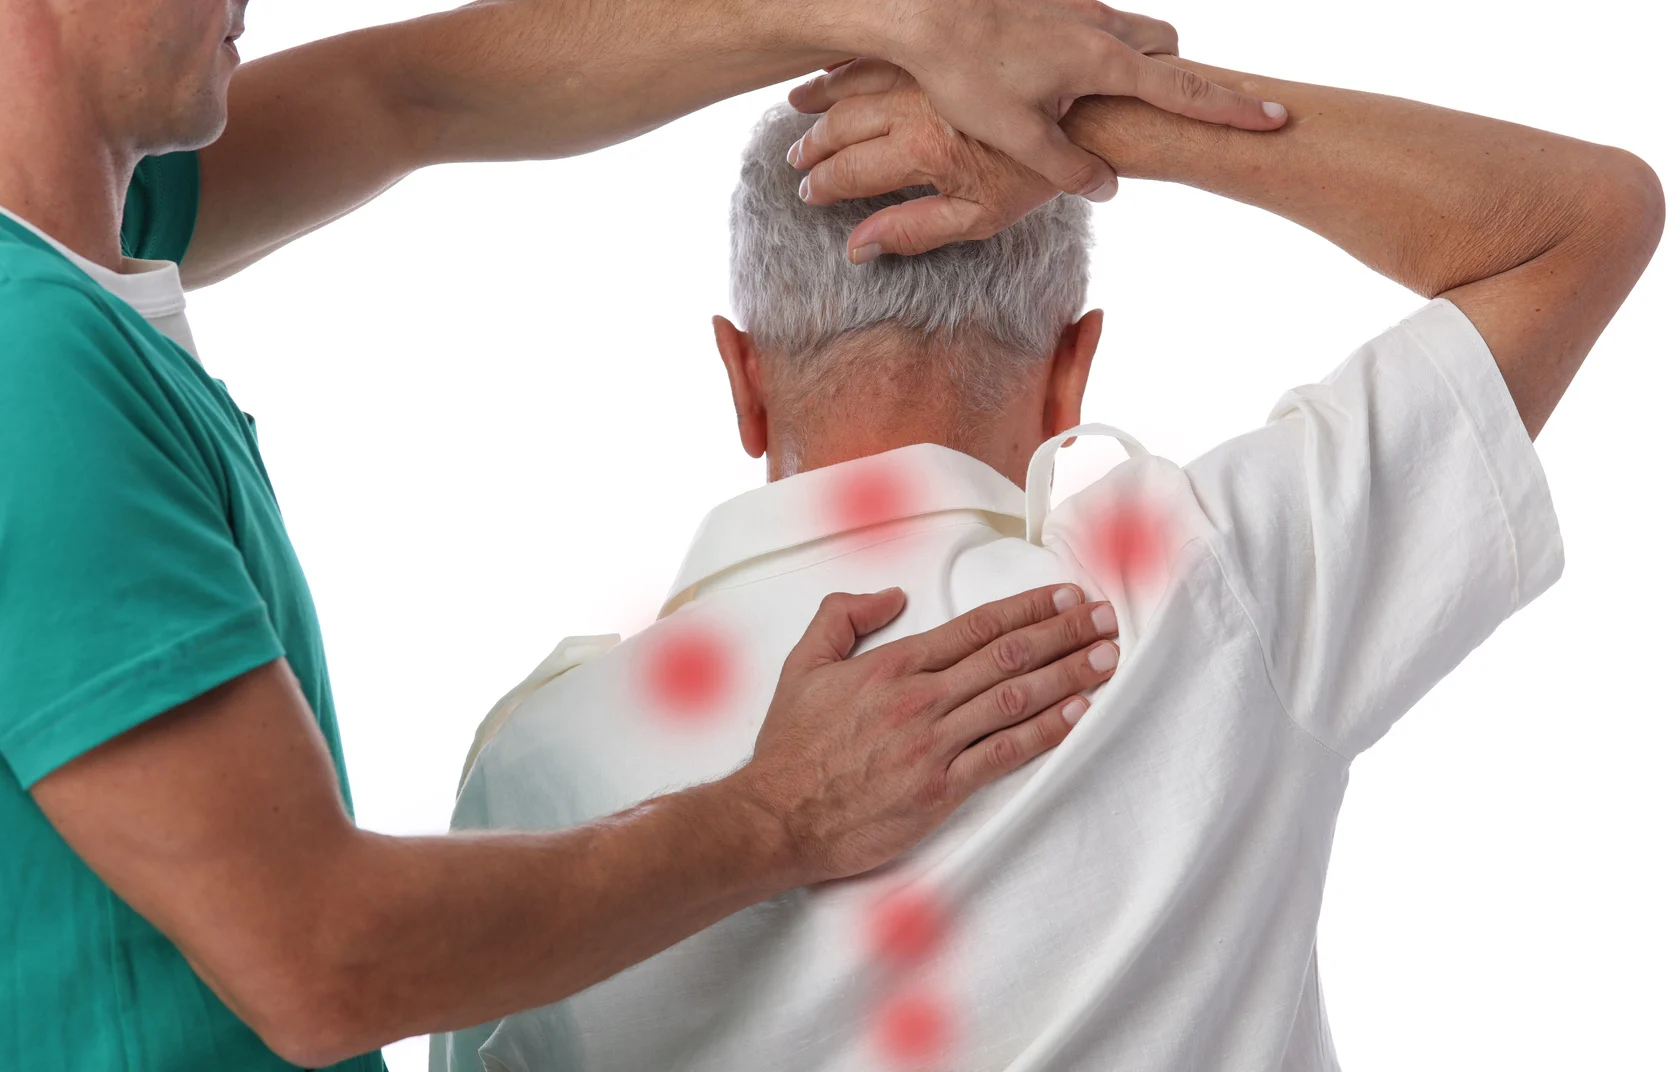 Chiropractic treatment. Shiatsu massage, Back Pain trigger points. Physiotherapy for senior male patient